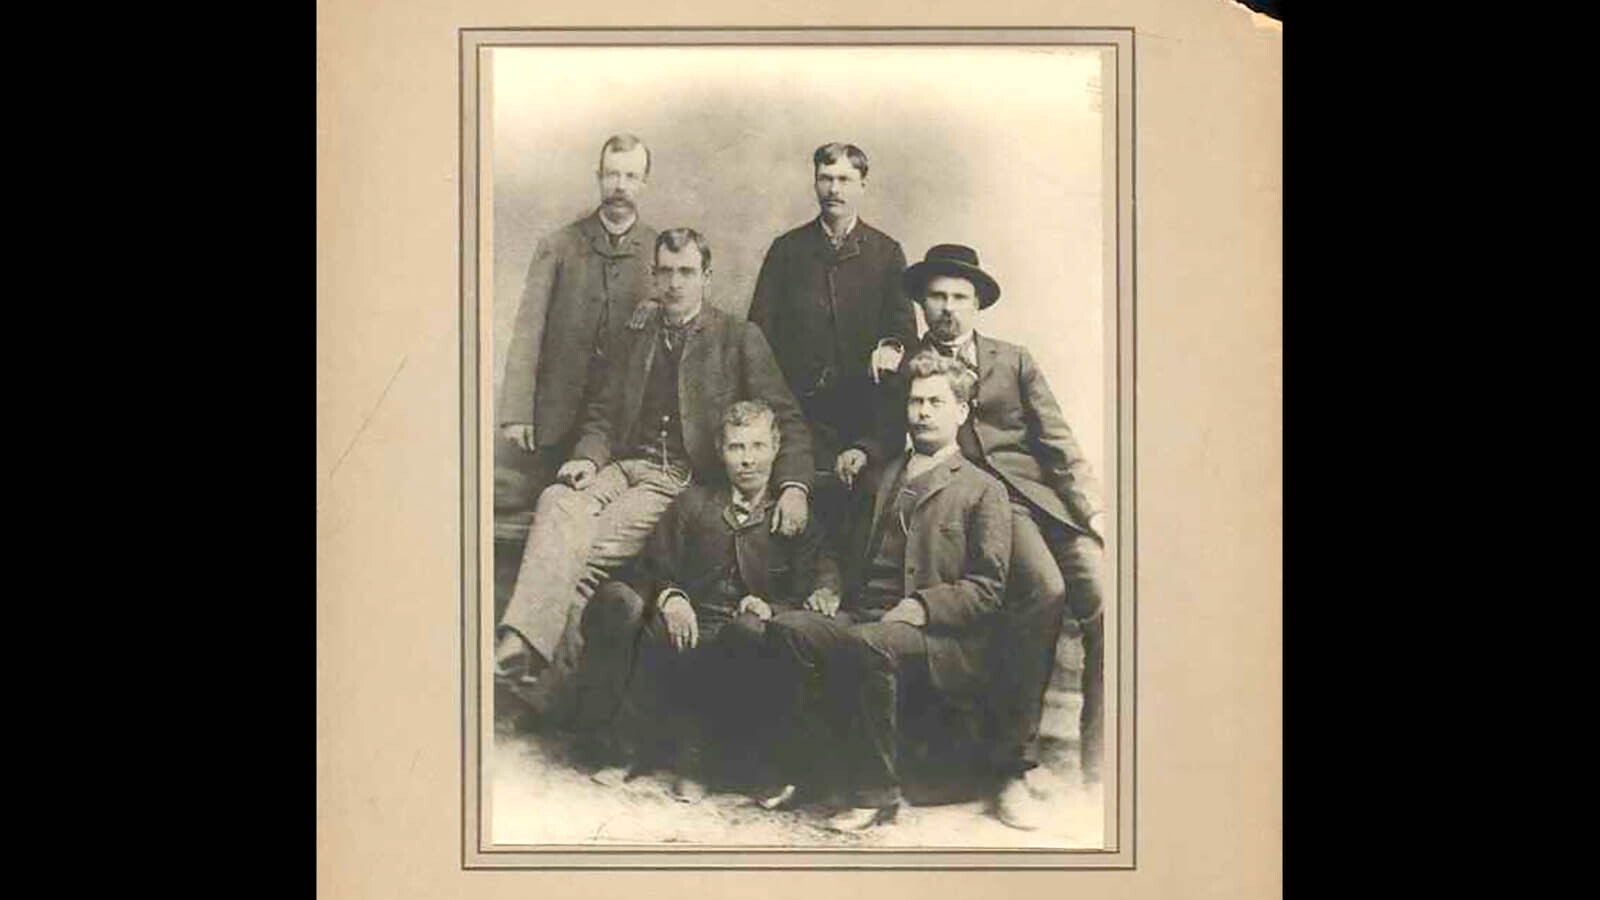 William “Missou” Hines, right front, with friends in the early days of Casper, Wyoming.